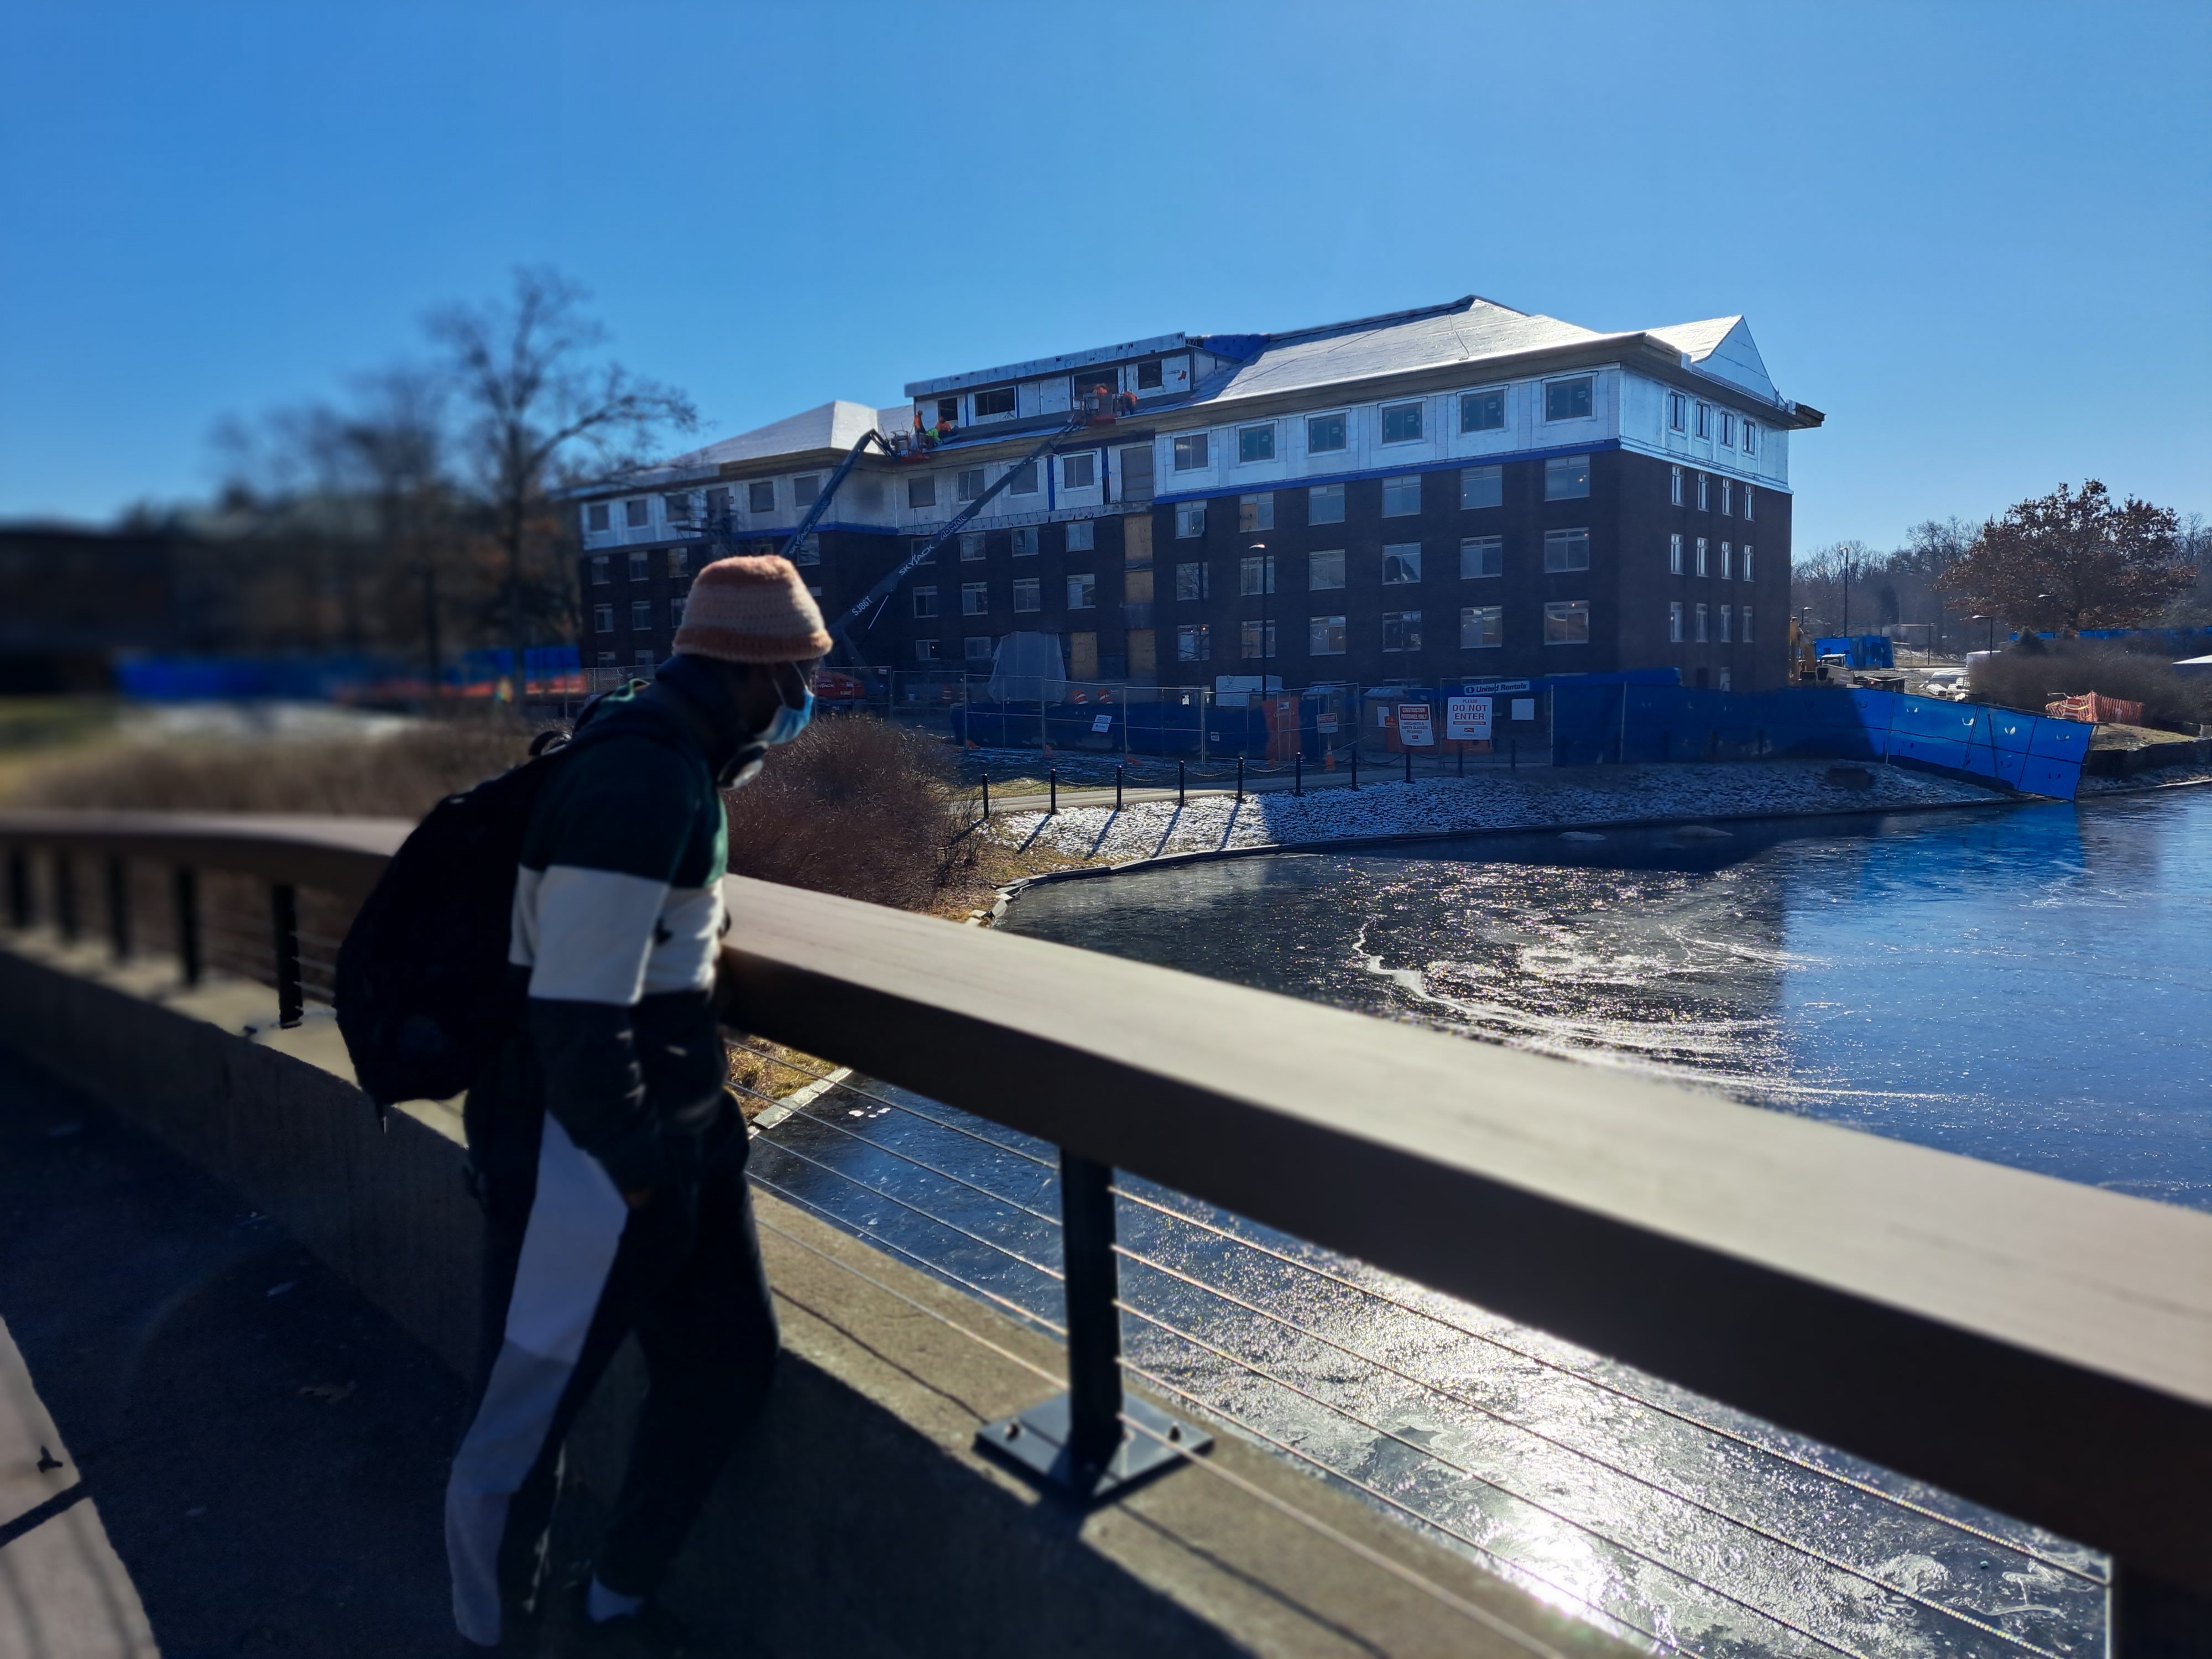 A student stands outside on a sunny day looking over a bridge at the water with a college in the background